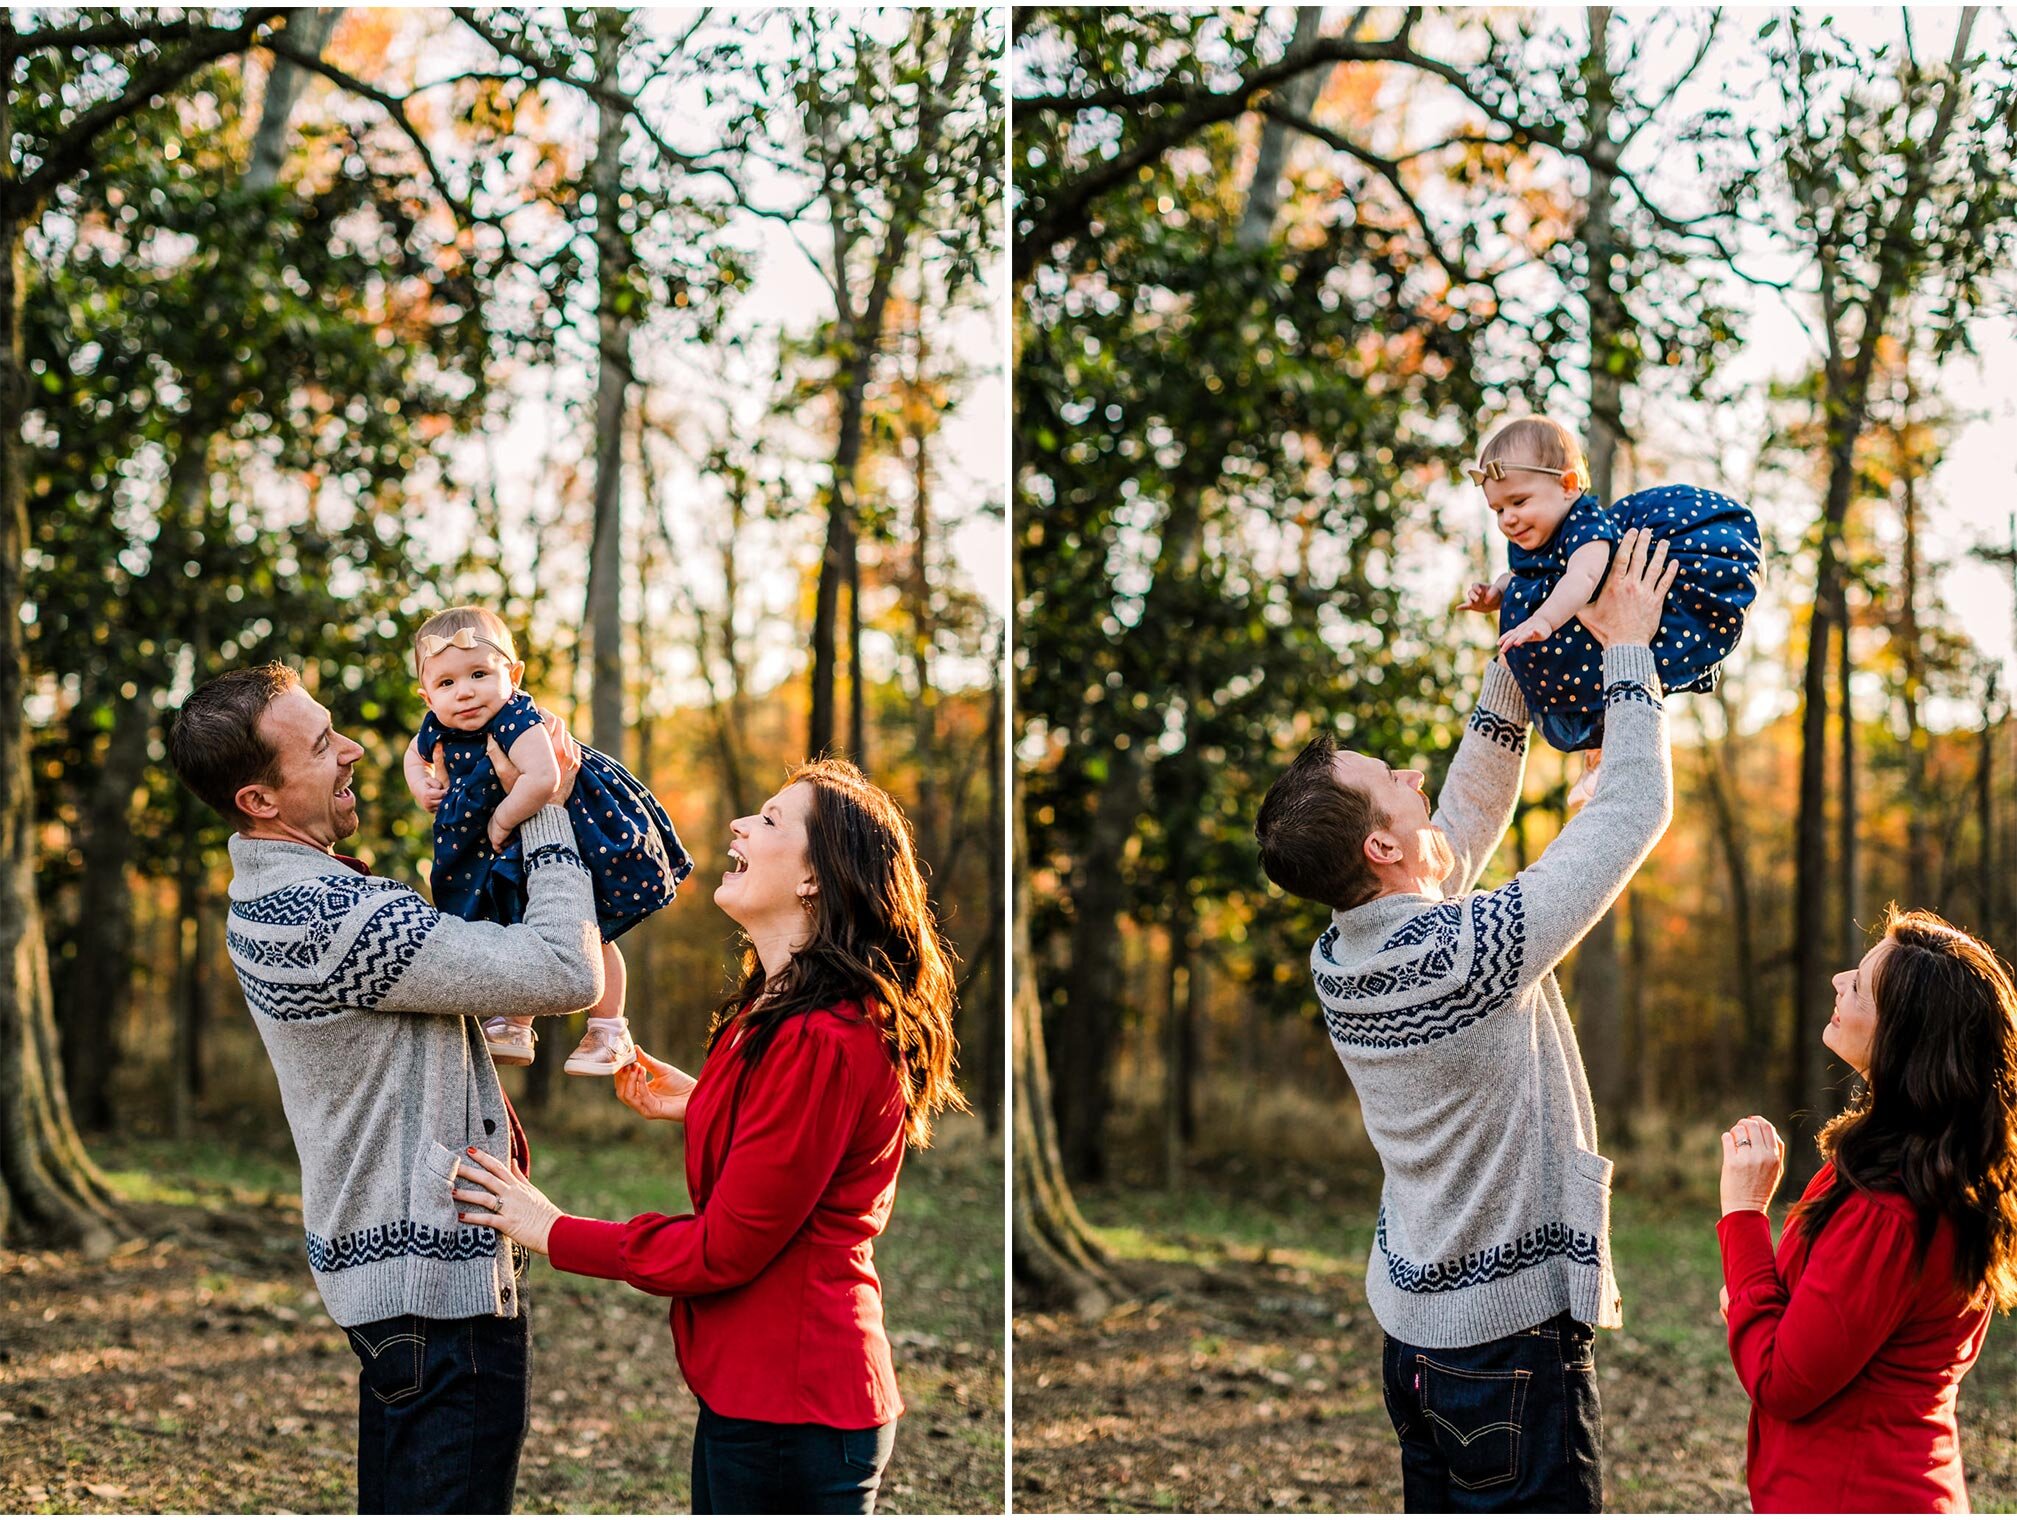 Durham Photographer | By G. Lin Photography | Dad throwing daughter in the air and laughing | West Point on Eno River